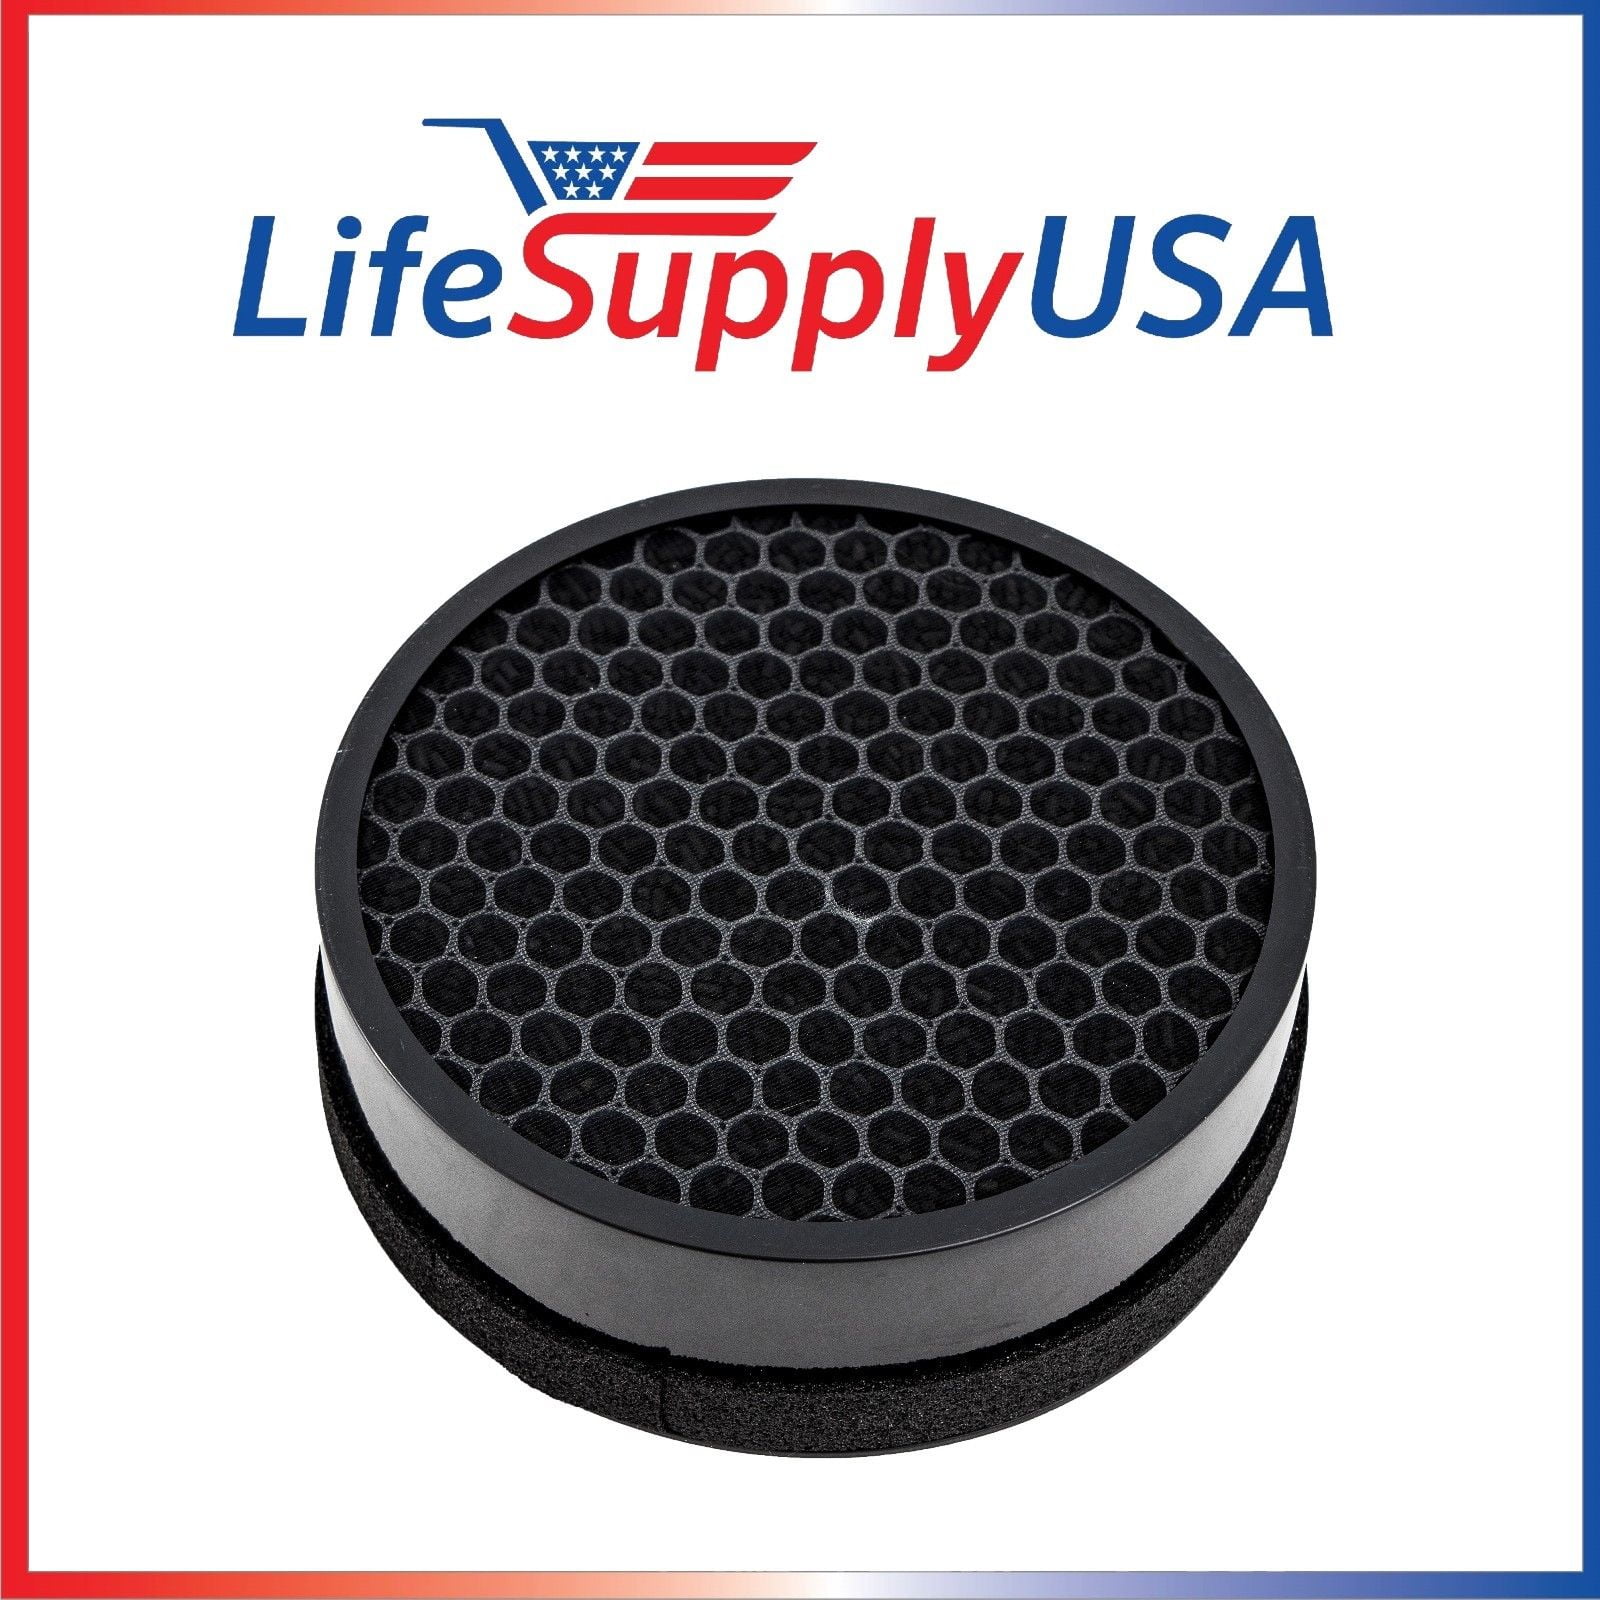 LifeSupplyUSA 5 Replacement True HEPA & Carbon Filter Sets for Levoit Air Purifier LV-PUR131 / LV-PUR131-RF